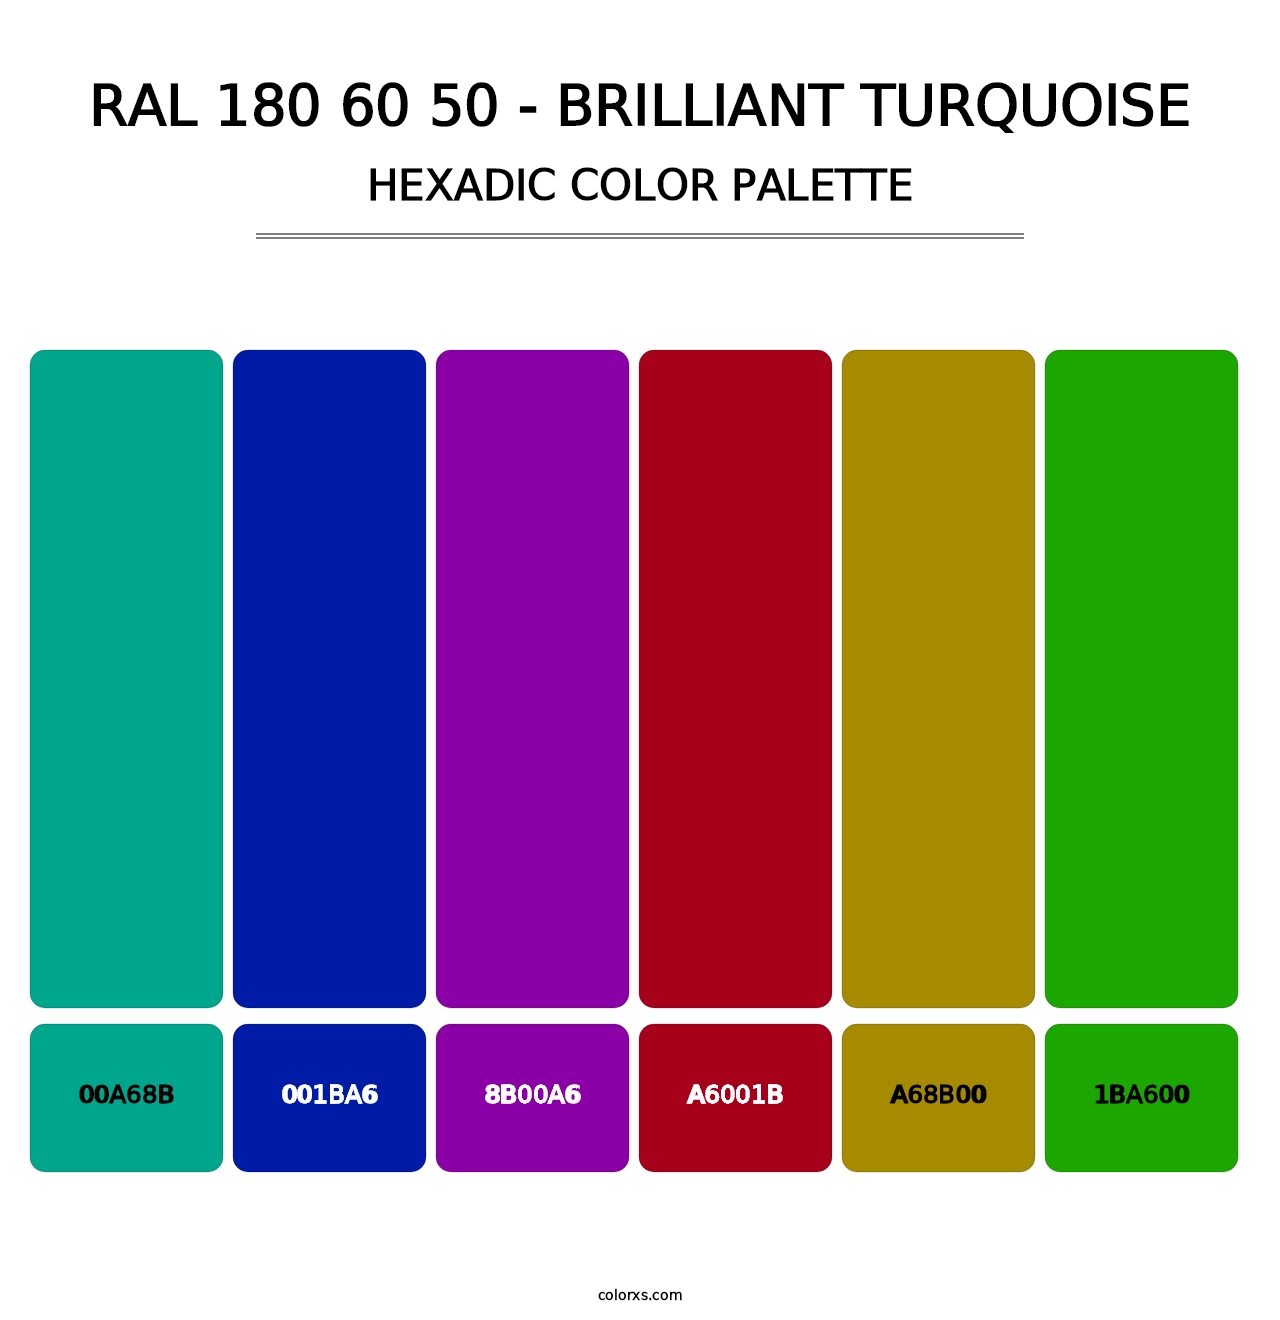 RAL 180 60 50 - Brilliant Turquoise - Hexadic Color Palette